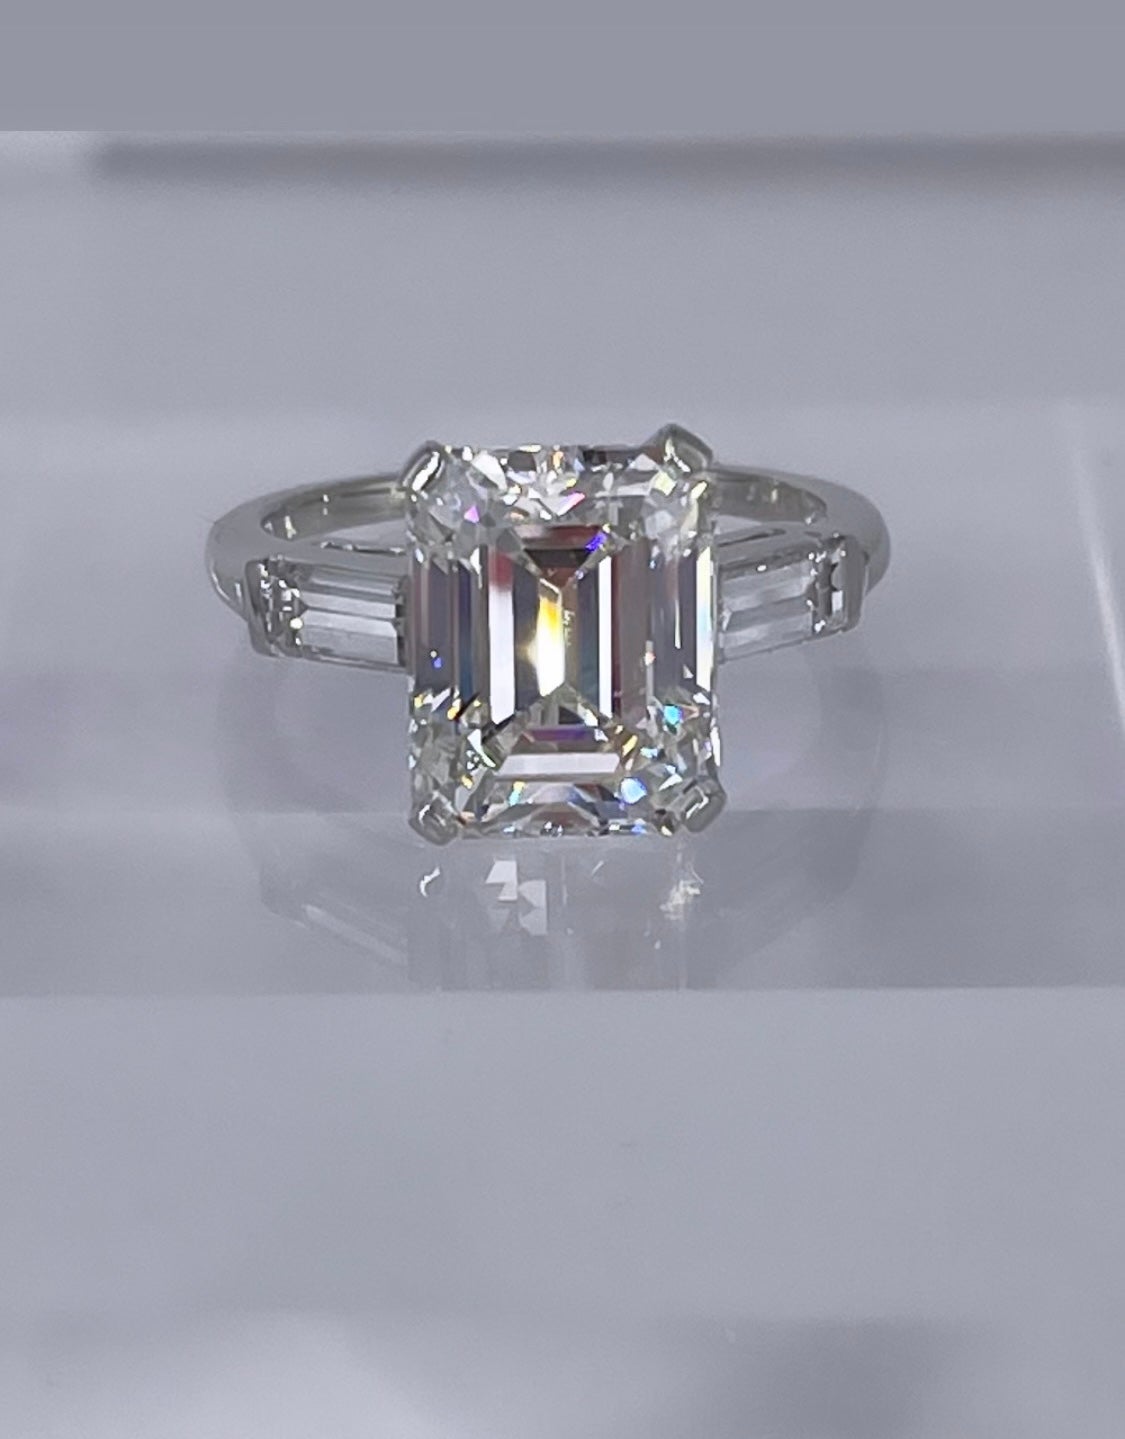 This timeless engagement ring by J. Birnbach is inspired by the clean lines of Art Deco design. The ring features a 4.77 carat emerald cut diamond, GIA certified J color and VS1 clarity. Because of an emerald cut's faceting, the diamond appears